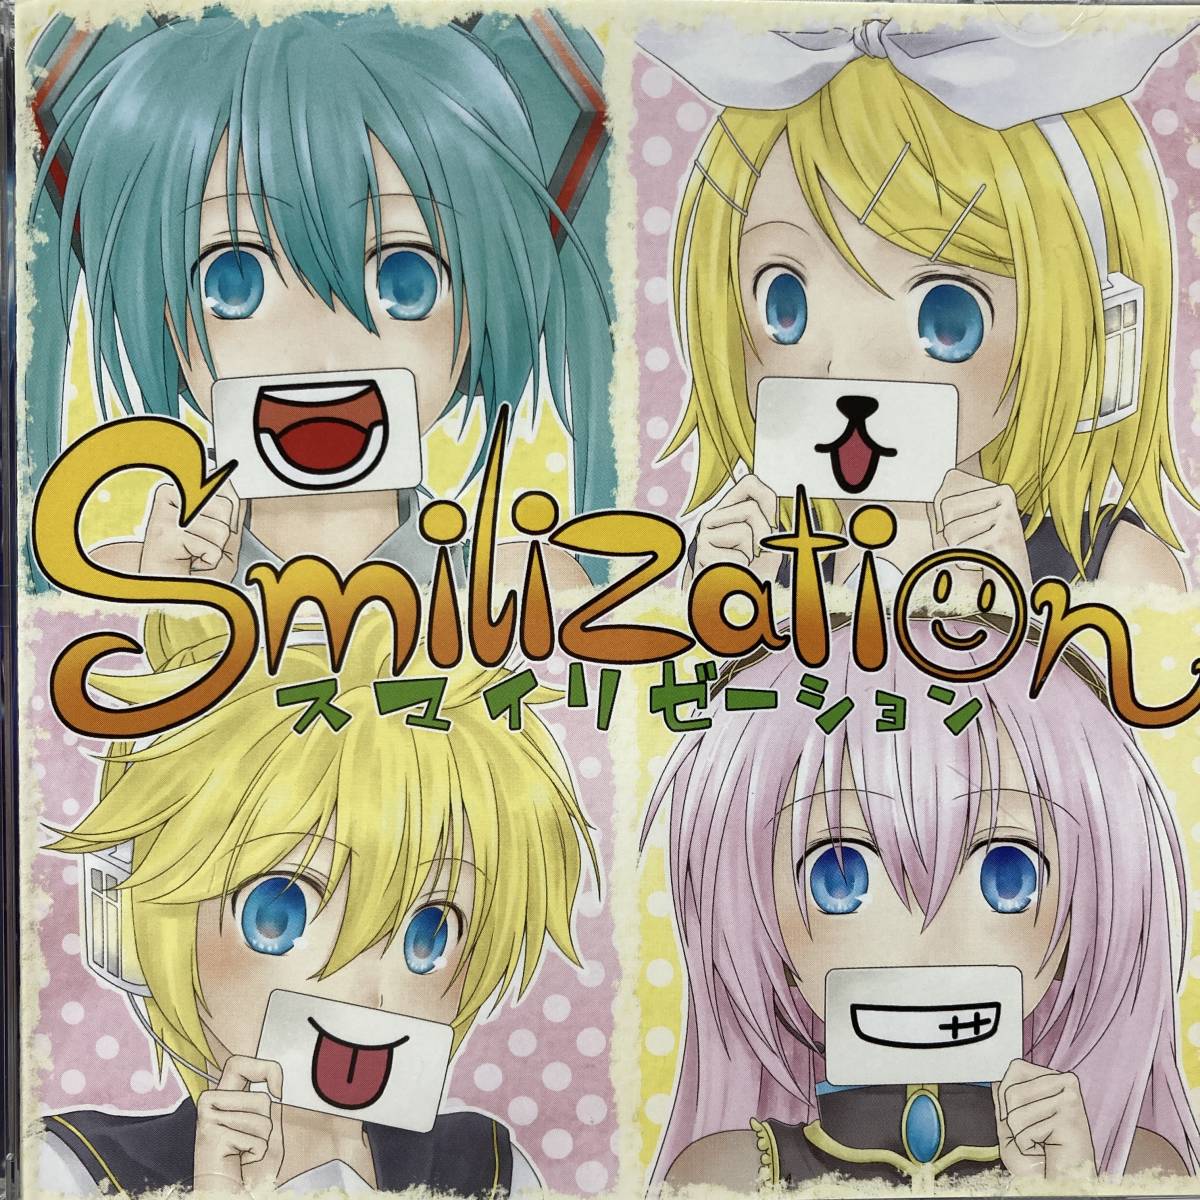 【Smilization スマイリゼーション/音戯噺屋◆同人CD】卑屈P VOCALOID ボカロ 初音ミク 鏡音リン 鏡音レン 巡音ルカ コミケット Comiket M2_画像1